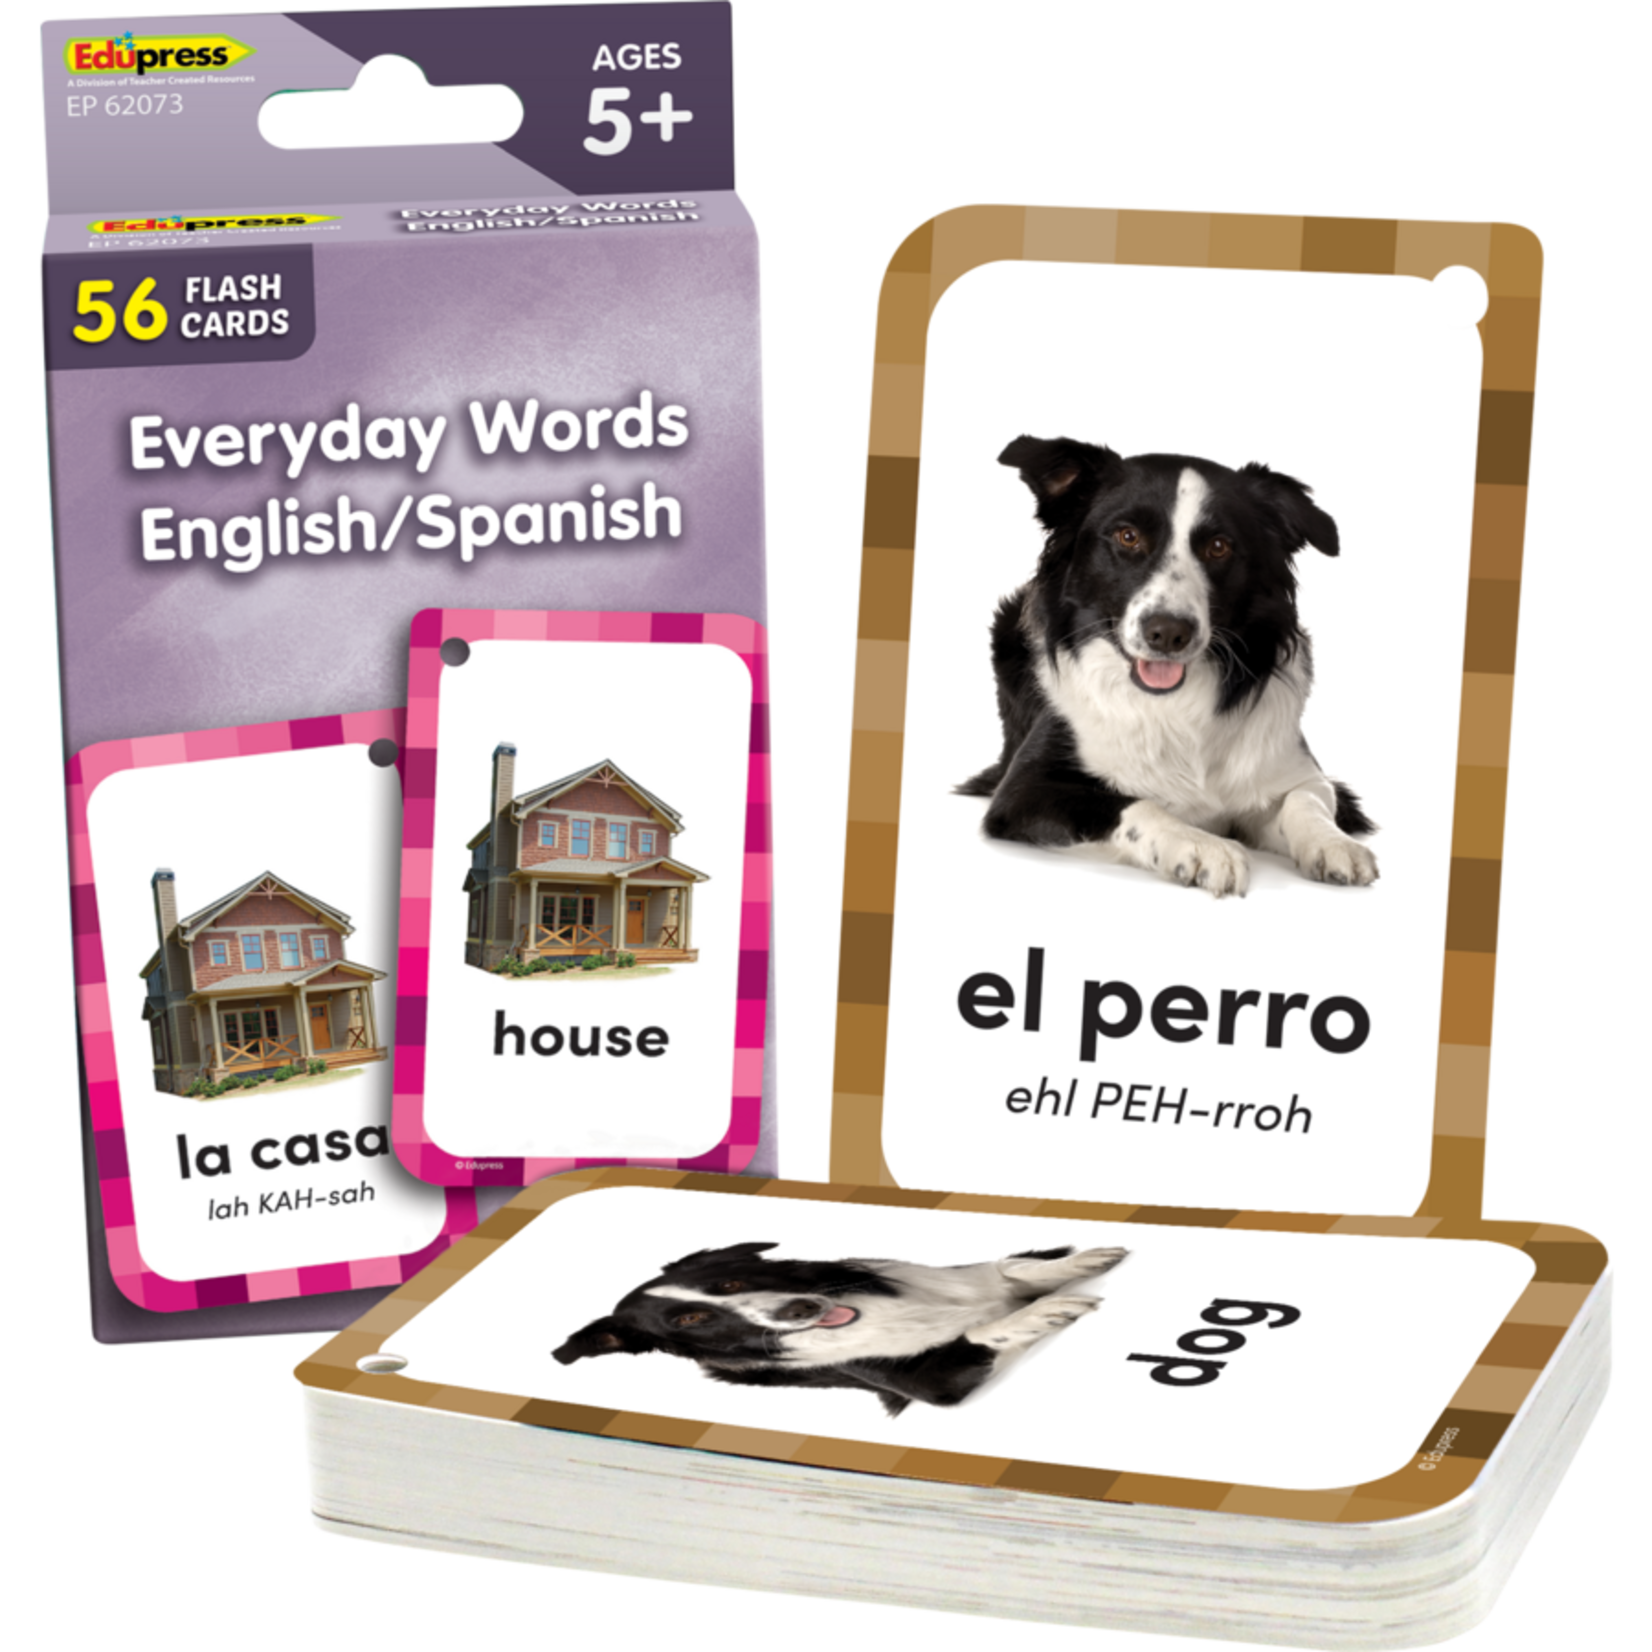 TEACHER CREATED RESOURCES Everyday Words English/Spanish Flash Cards